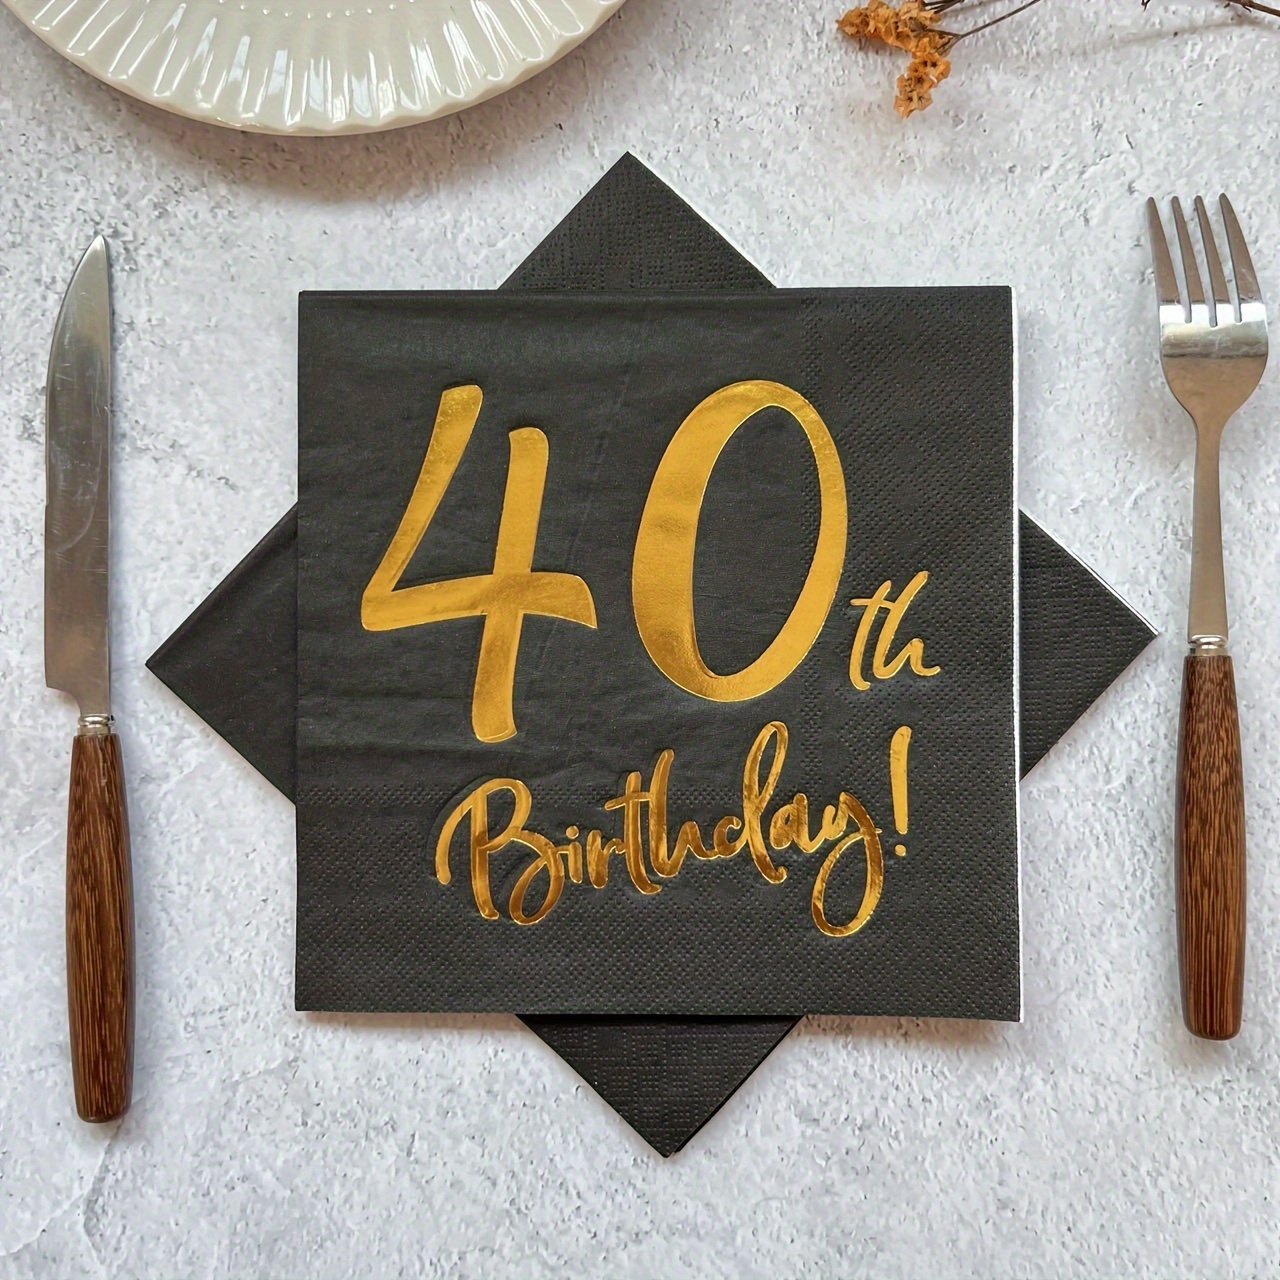 

40th Birthday Black Golden Foil Napkins - 20 Pack, 2-ply Disposable Paper Napkins For 40th Birthday Party, Hotel, Restaurant, Bar Tableware Supplies (6.5x6.5 Inch) - Carnival Themed Celebration